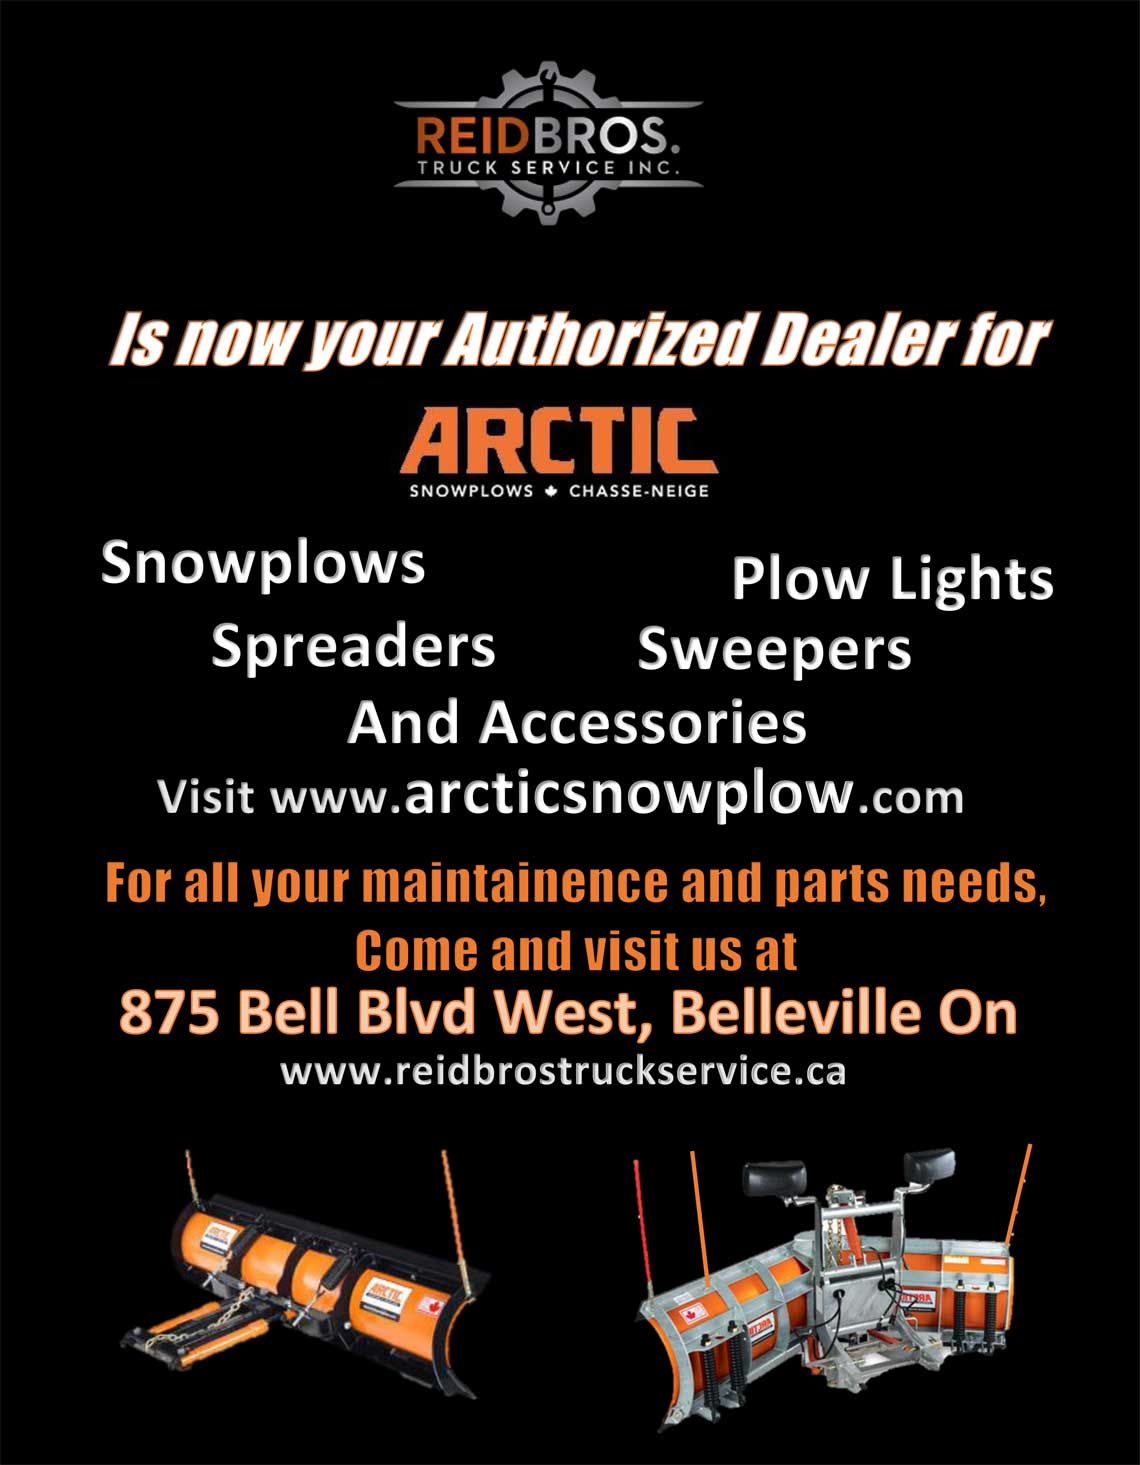 Authorized Dealer for Arctic